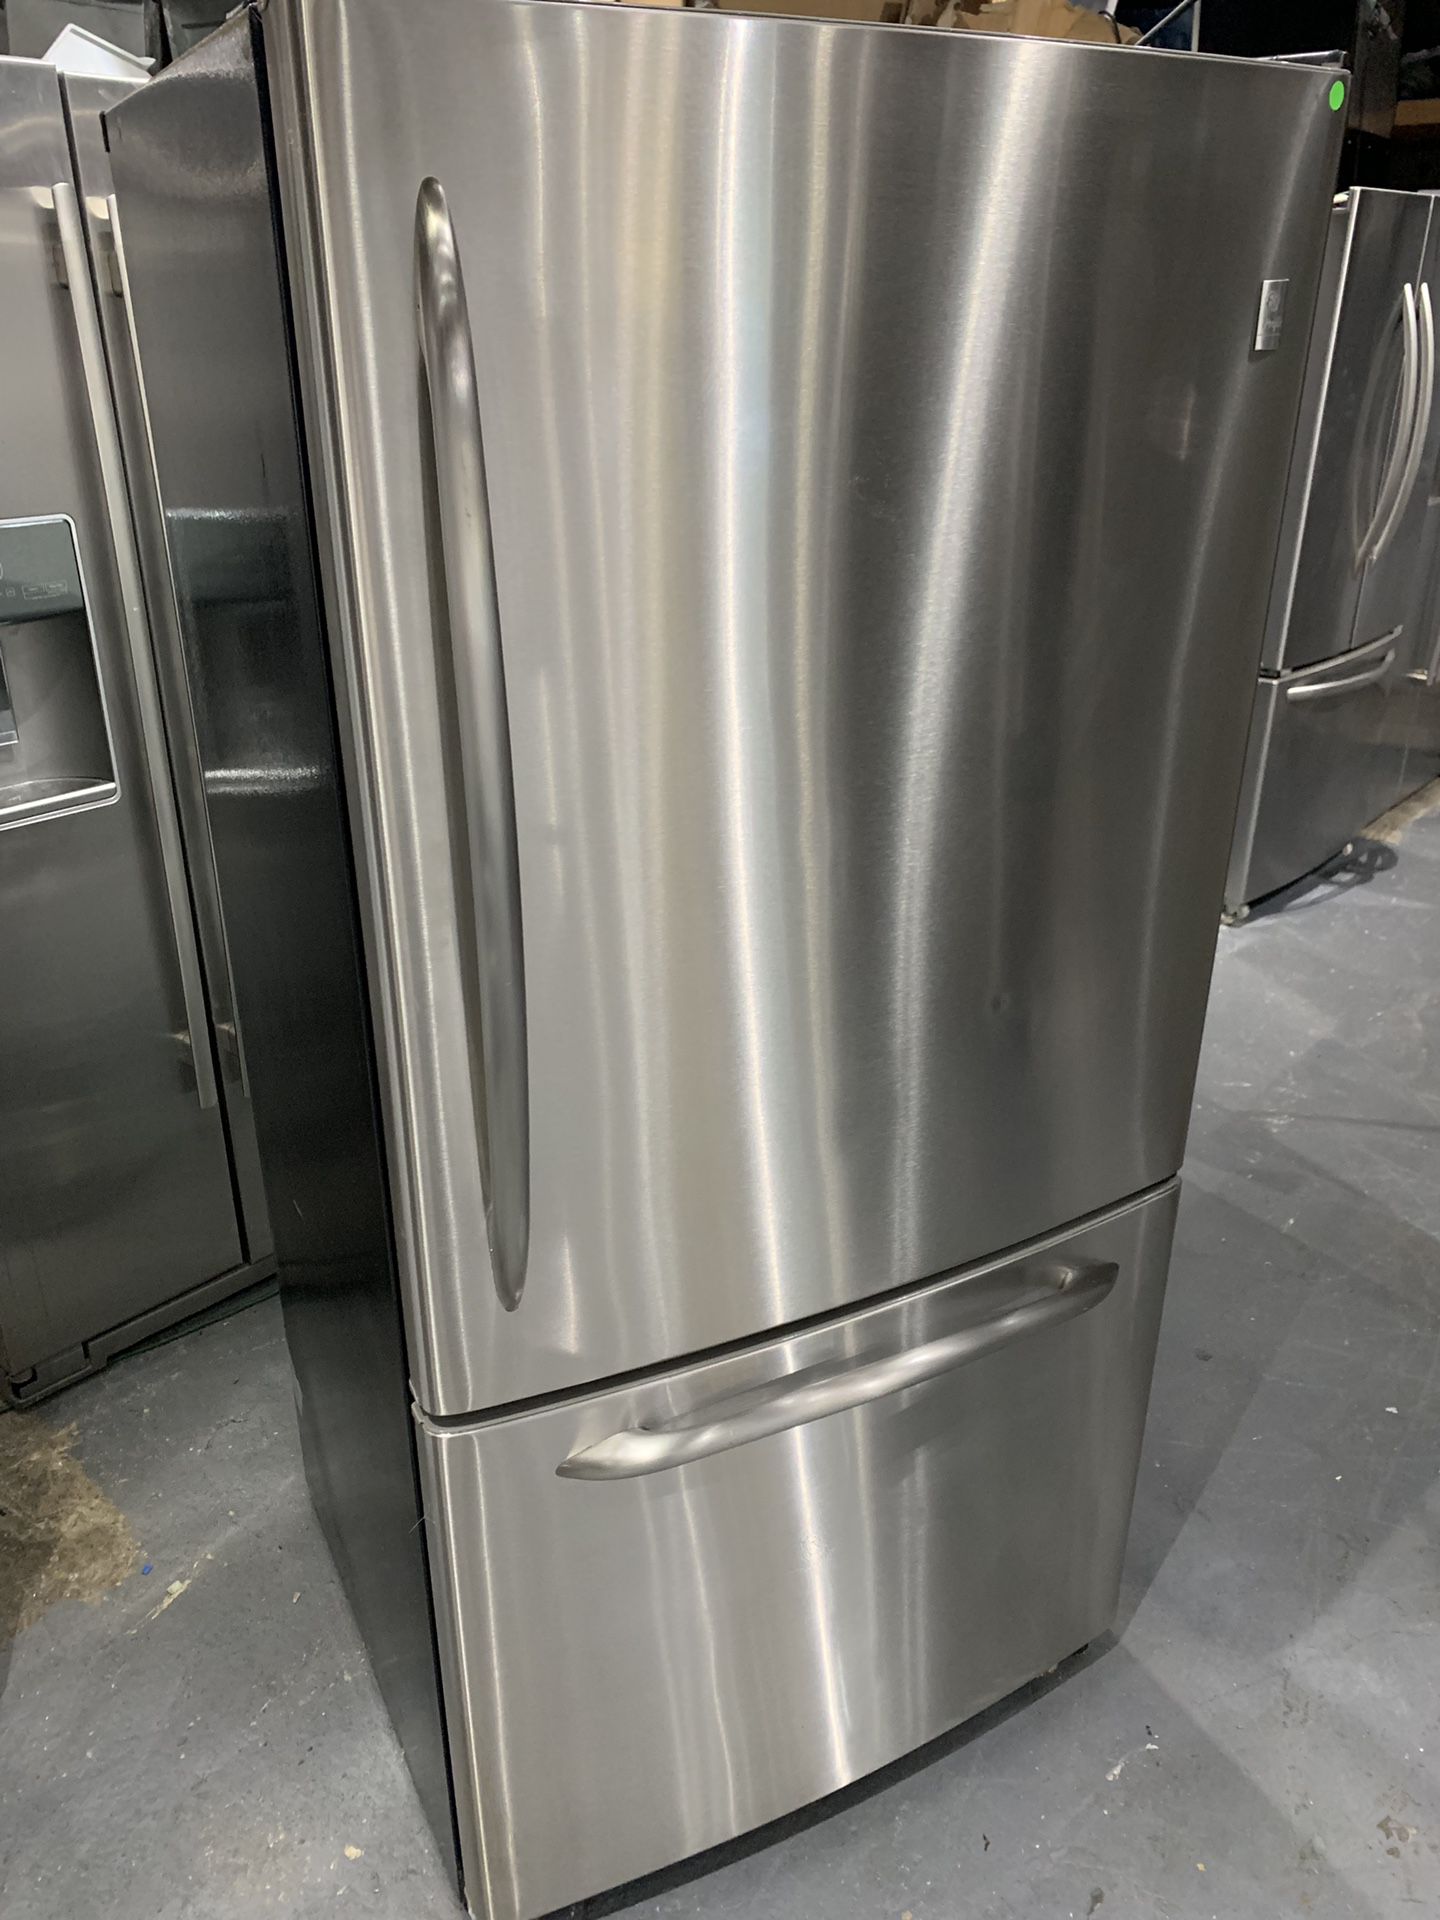 Ge profile refrigerator 33 x 68 stainless steel works perfect clean 60 days warranty